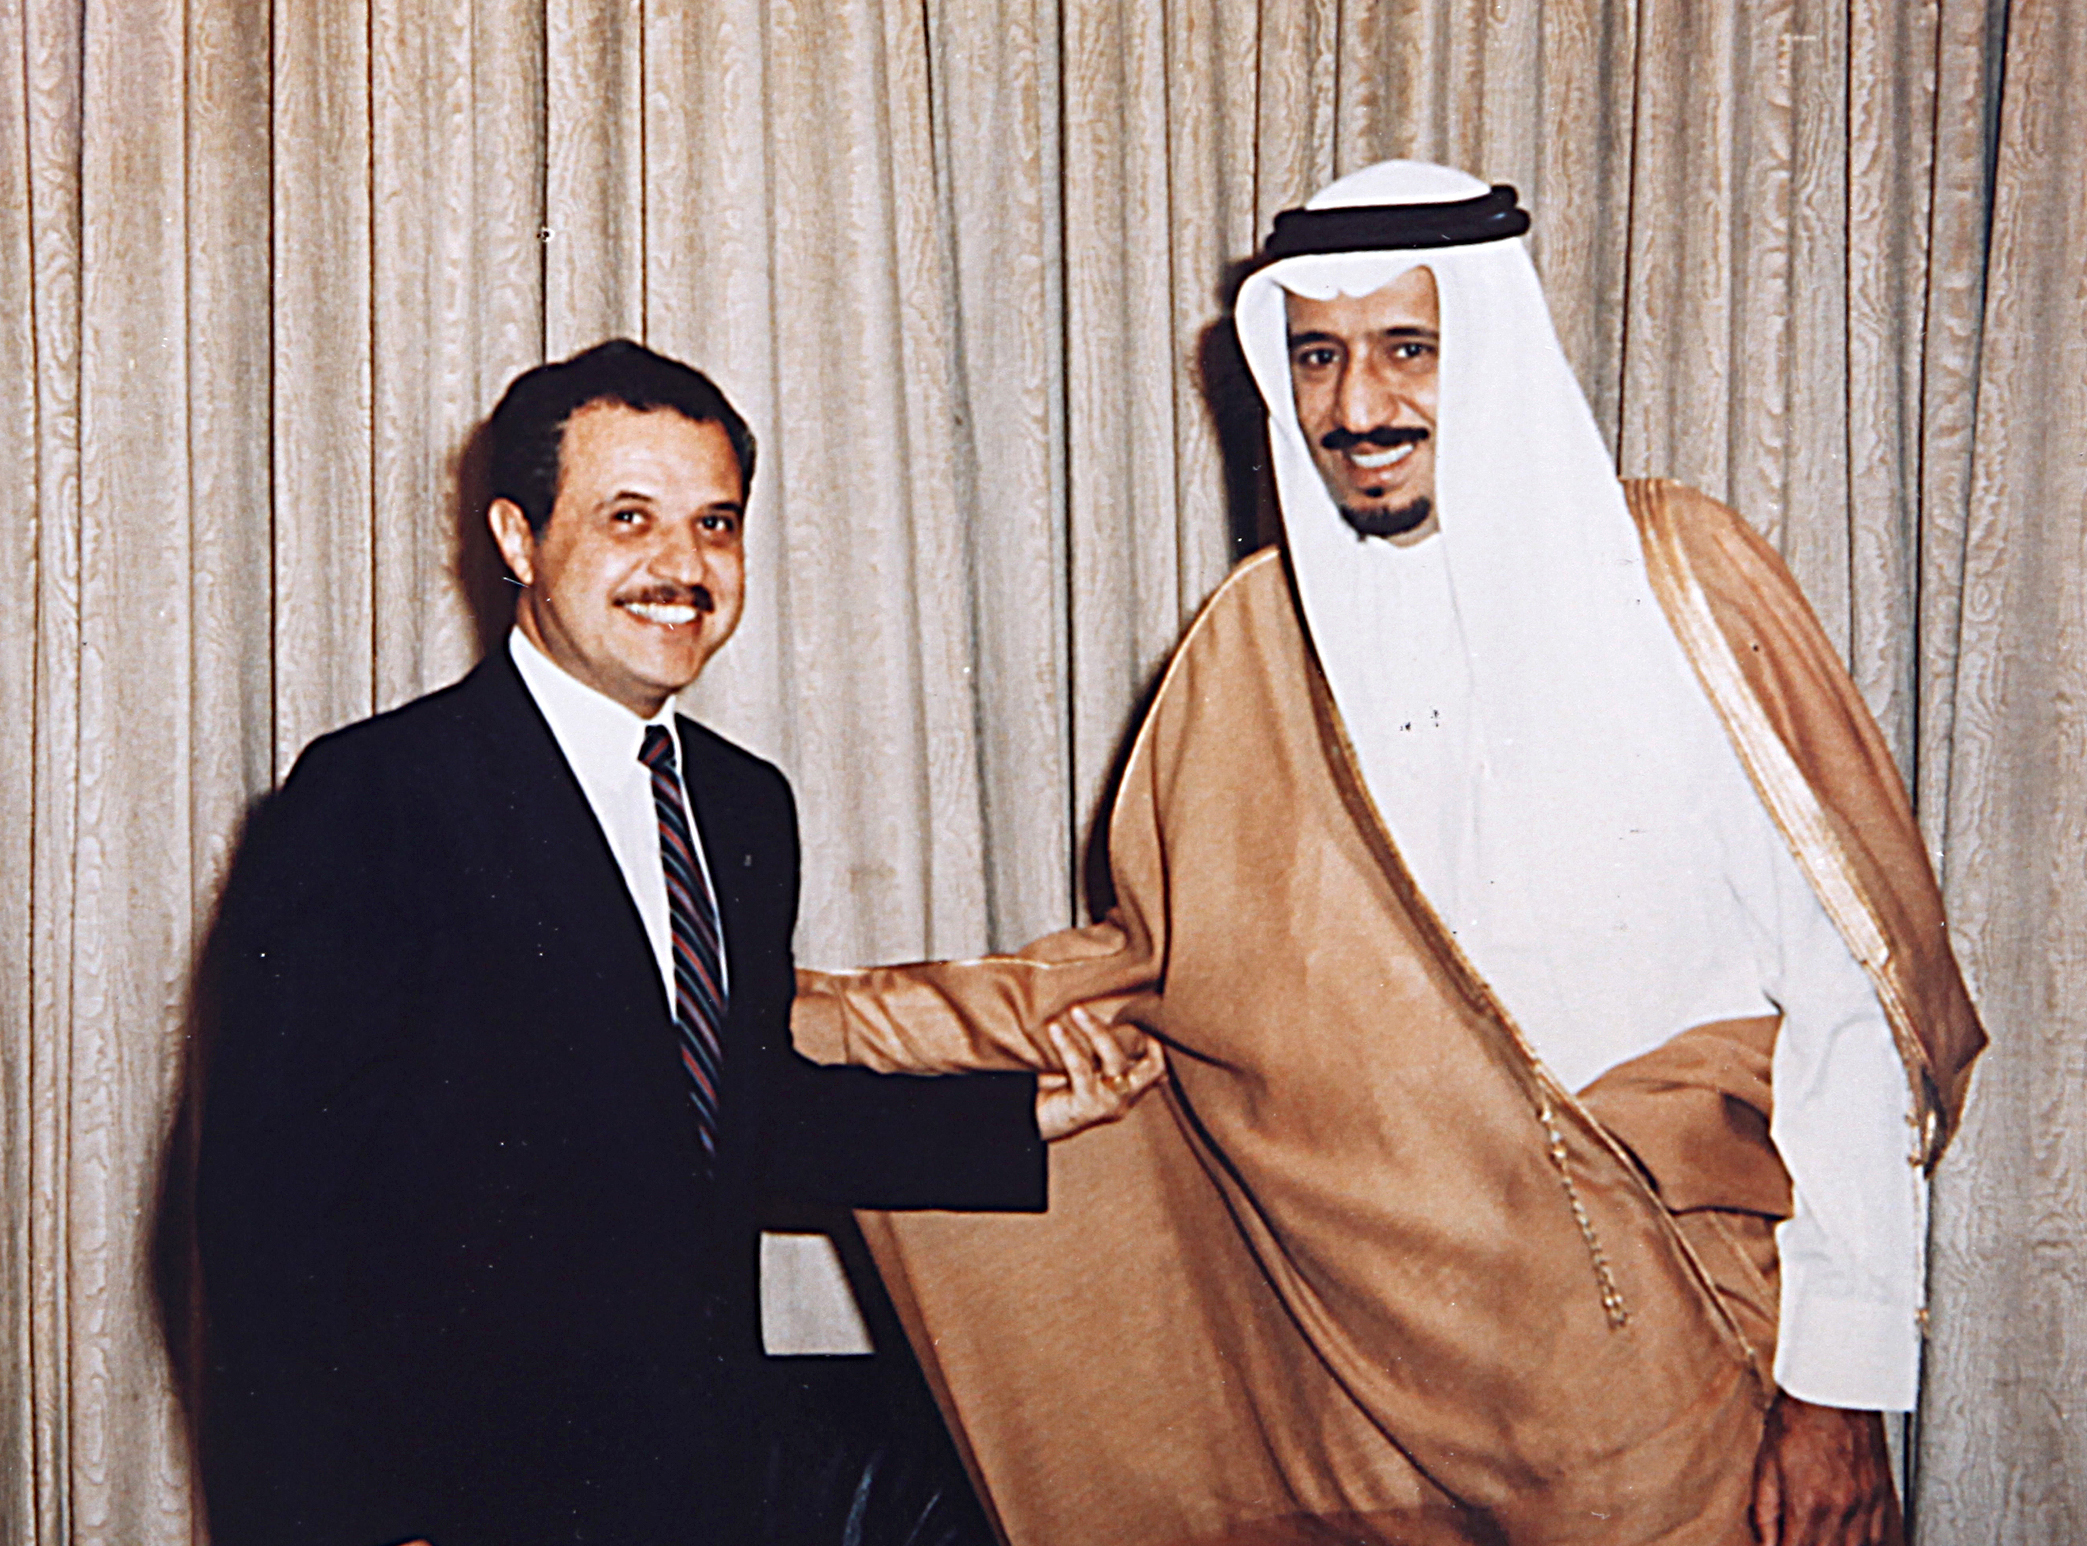 With His Majesty King Salman